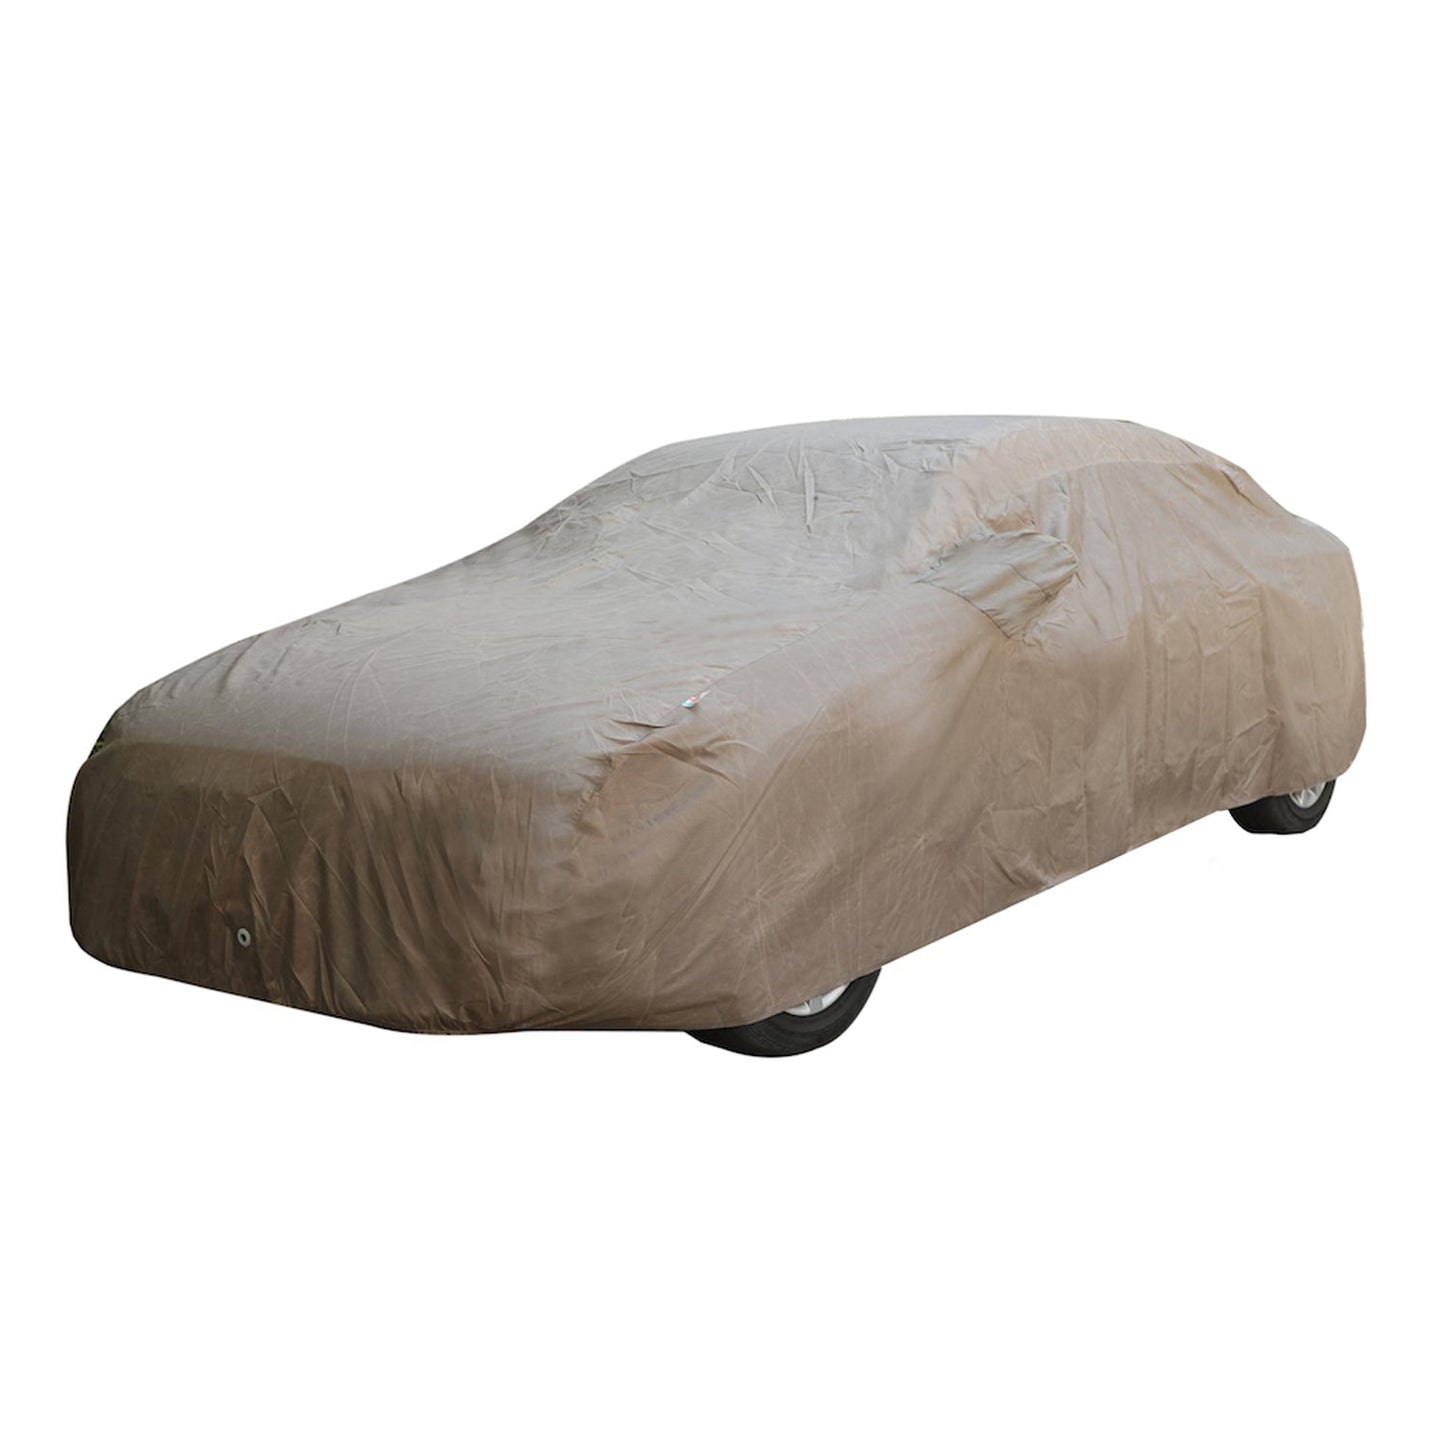 Oshotto Brown 100% Waterproof Car Body Cover with Mirror Pockets For Ford Fiesta